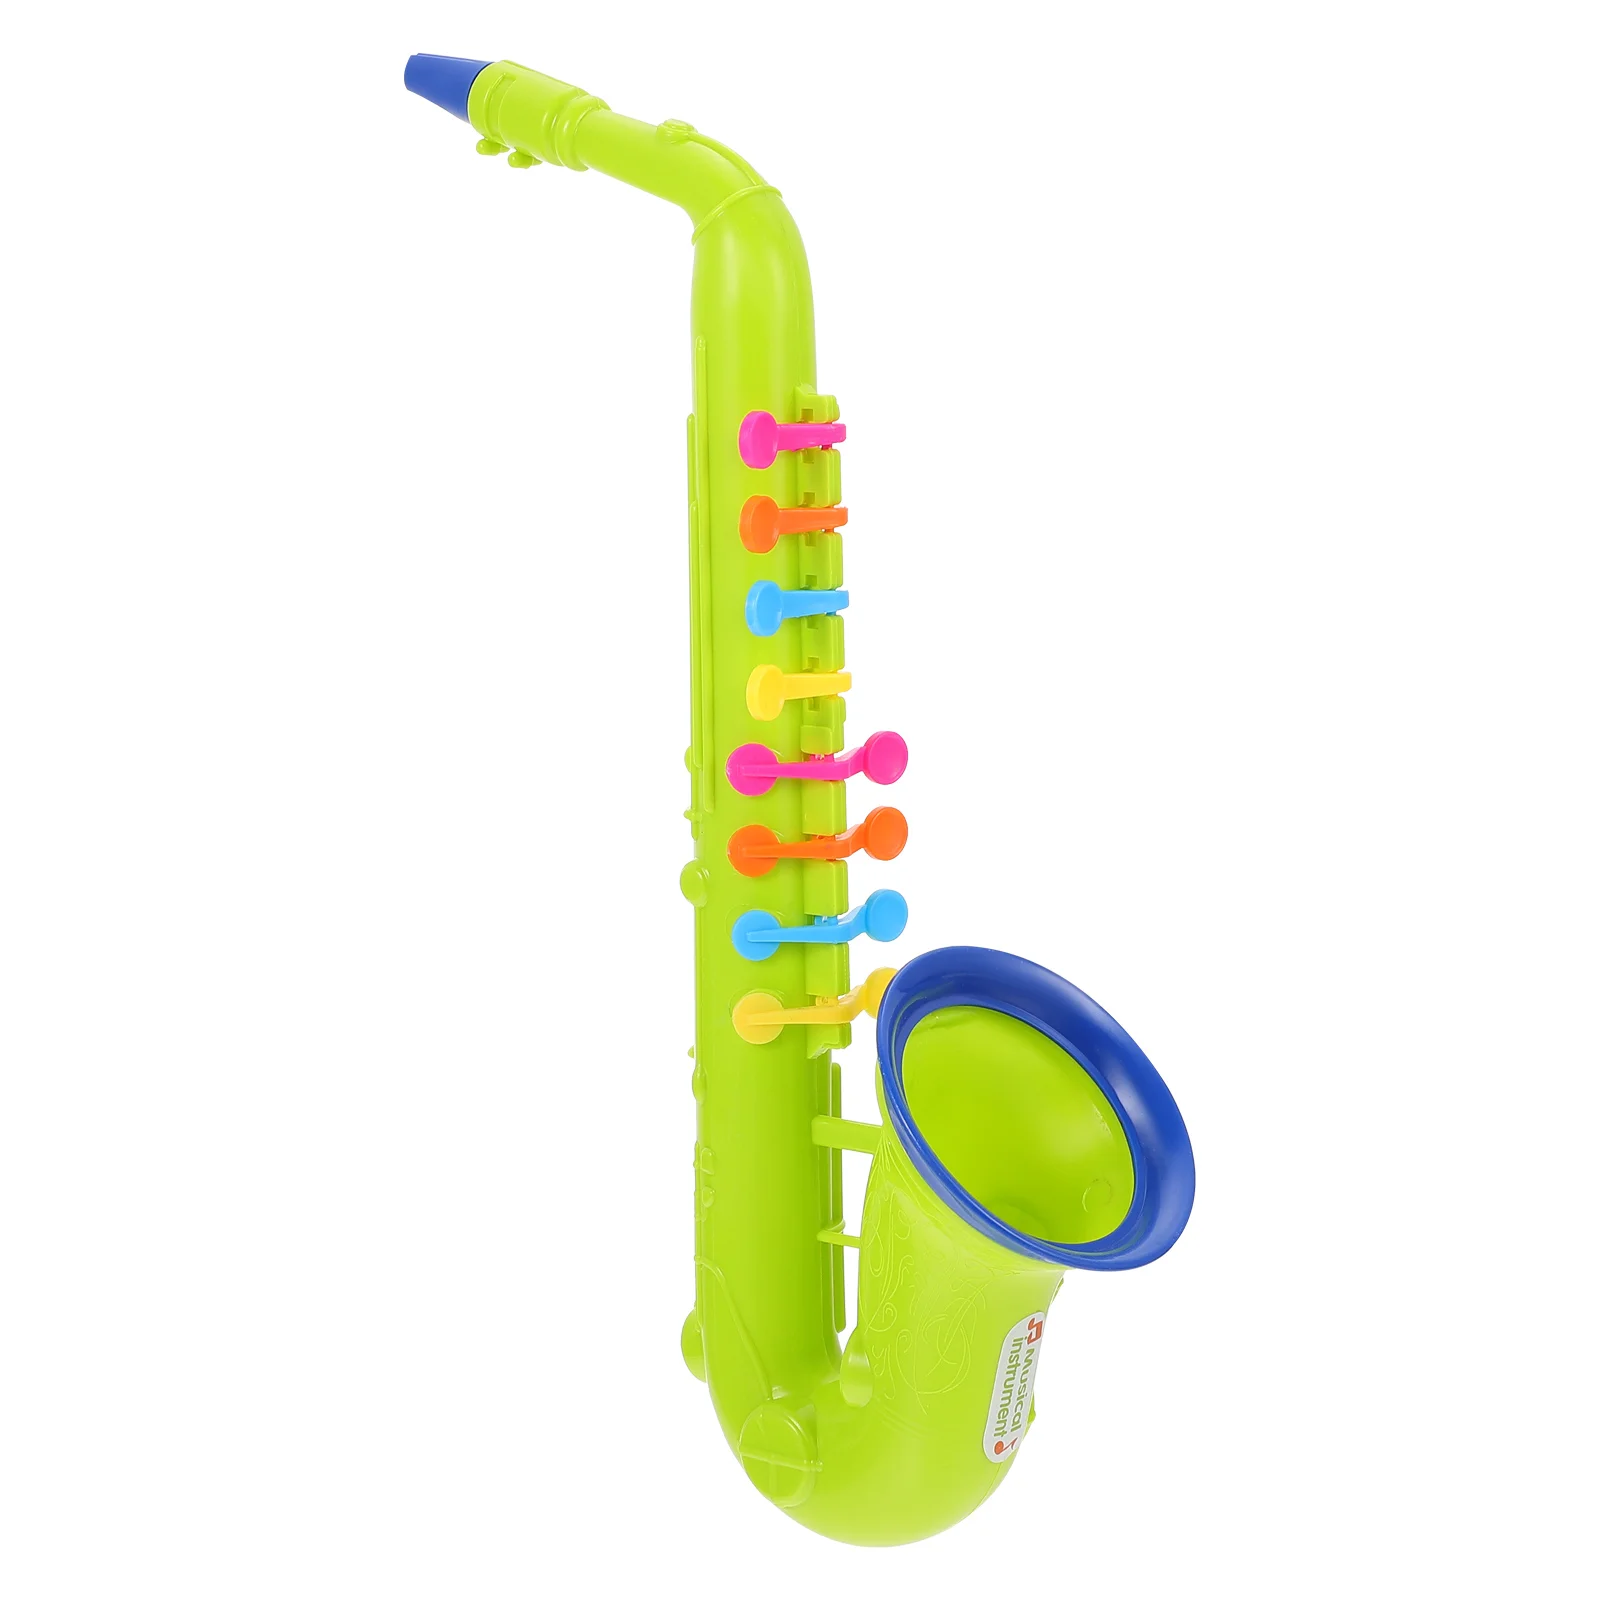 

Simulated Musical Toy Christmas Toys Practical Instrument Plaything Kids Abs Birthday Party Favor Realistic Prop Child Mini